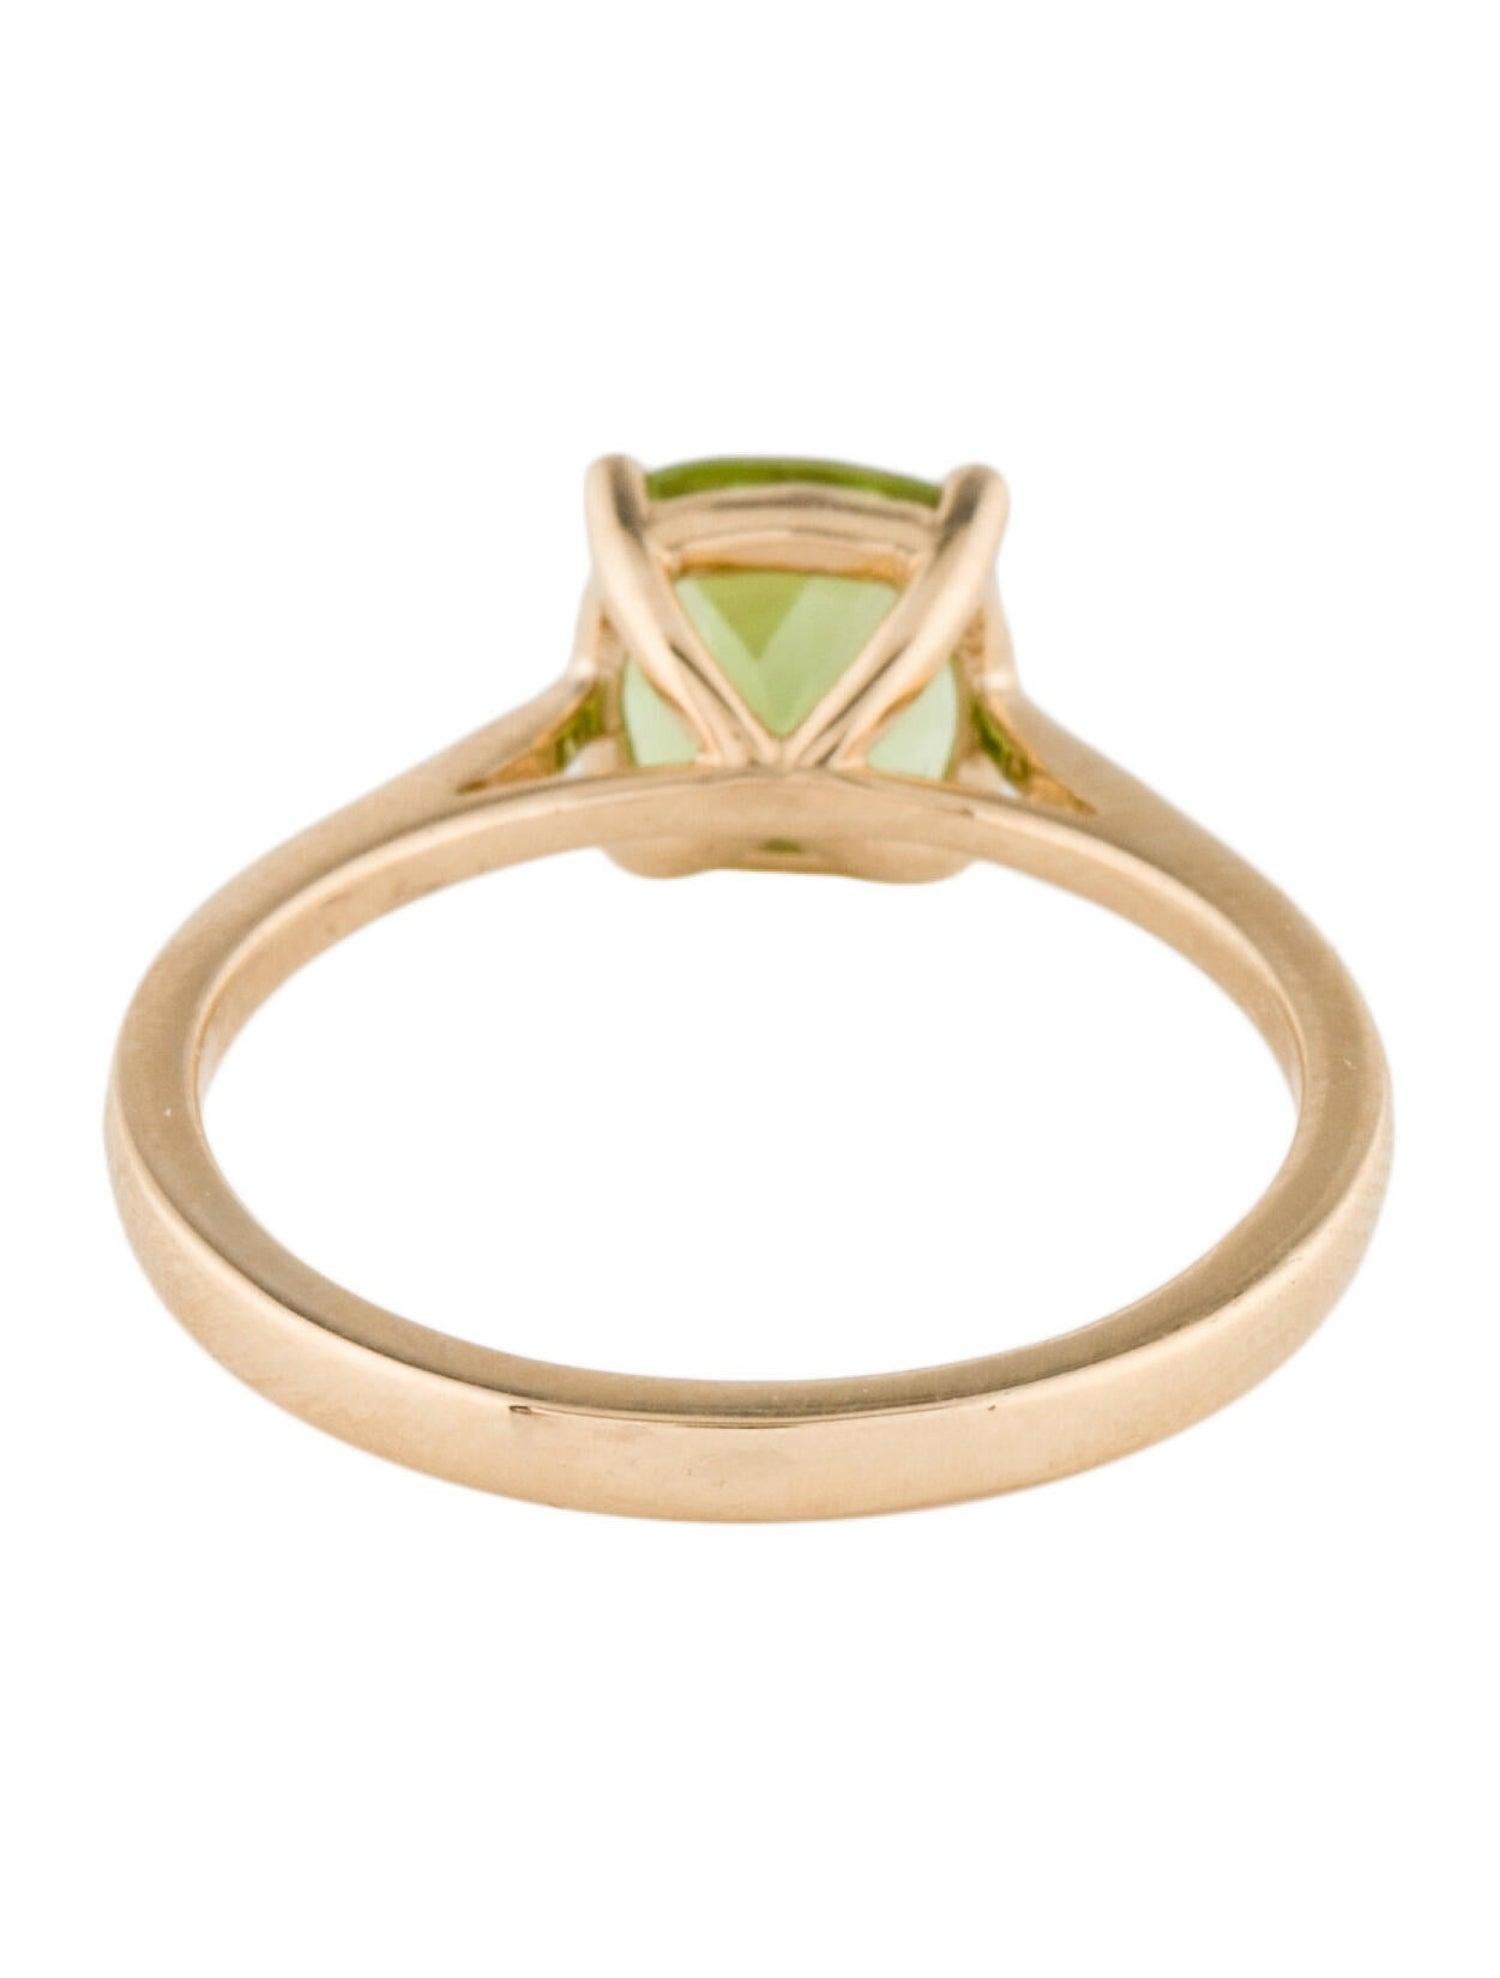 Brilliant Cut Stunning 14K Peridot Cocktail Ring 1.74ctw  Size 7  Elegant Statement Jewelry For Sale